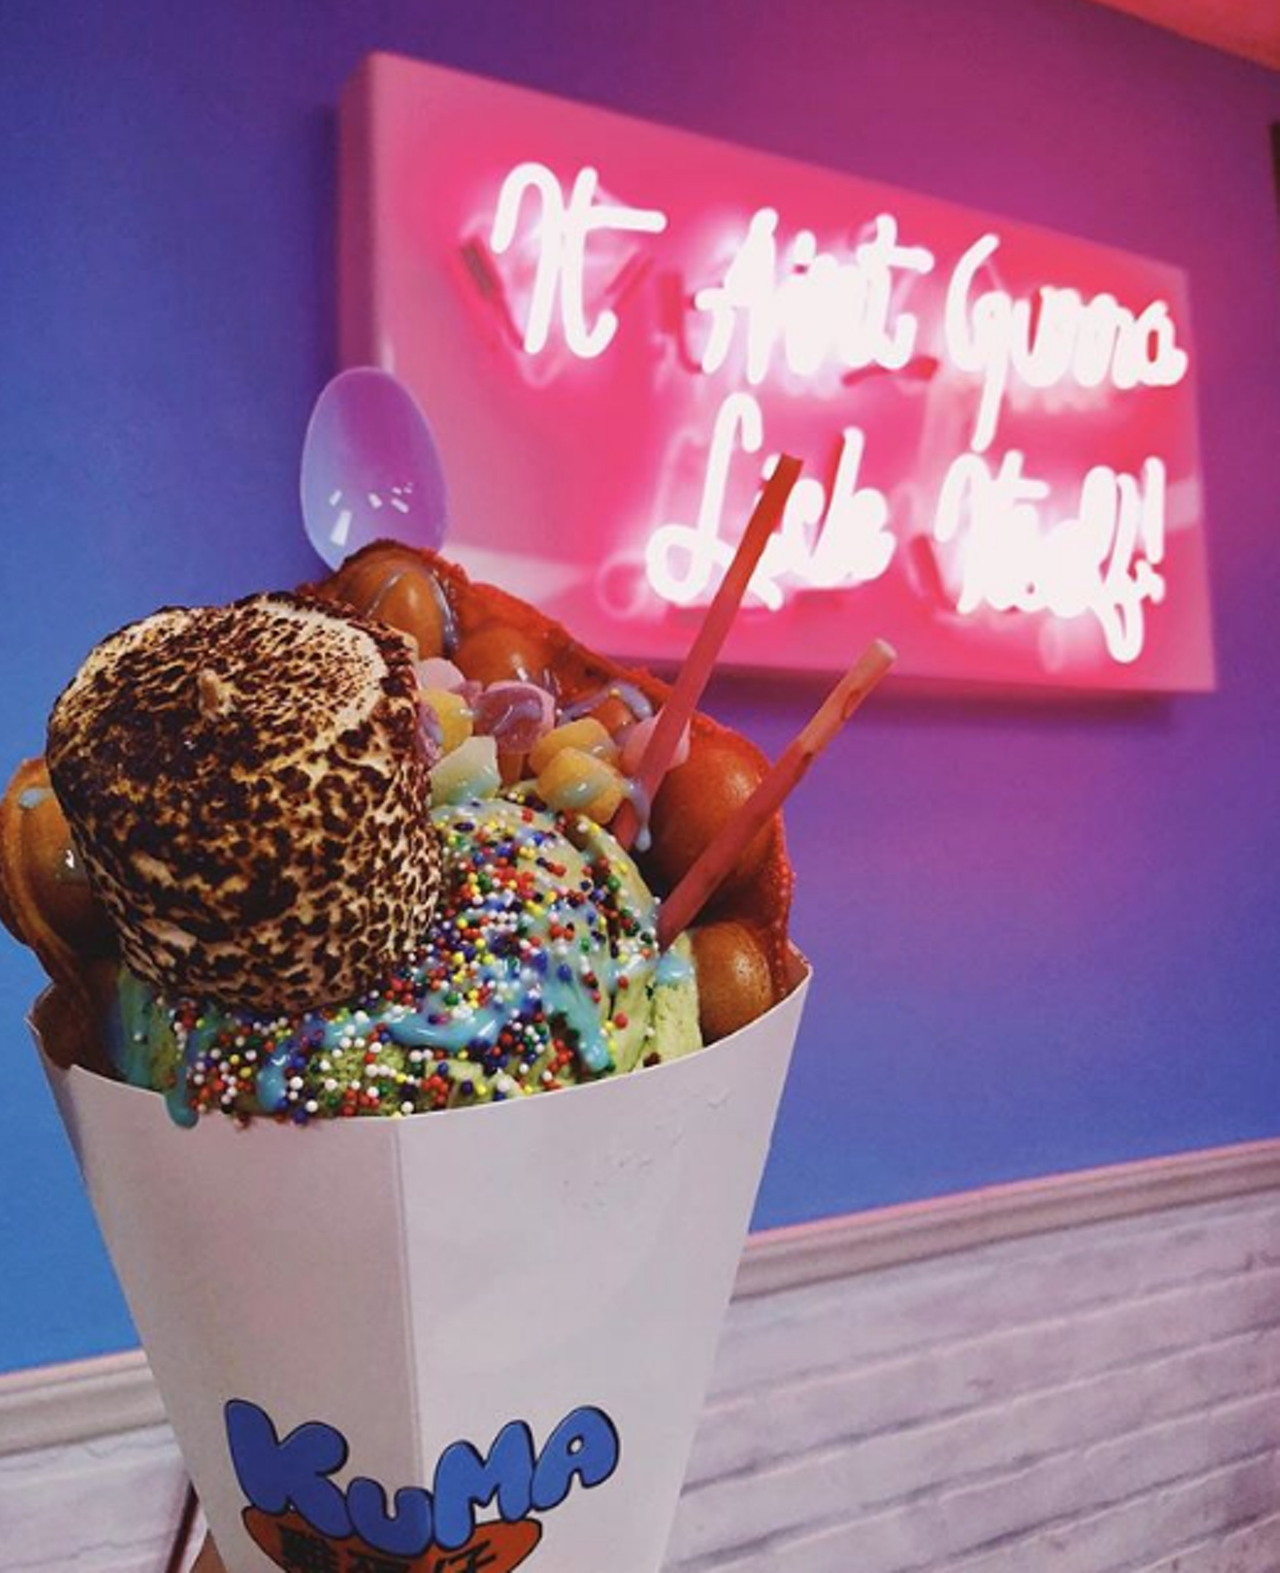 Kuma
Multiple locations, instagram.com/kuma.satx
With one location not too far from the Medical Center and another in Alamo Ranch, peeps to the north have a true treat in their backyard. This colorful chain offers Hong Kong waffles made complete with fun flavors and toppings as you wish.
Photo via Instagram / madele_ine